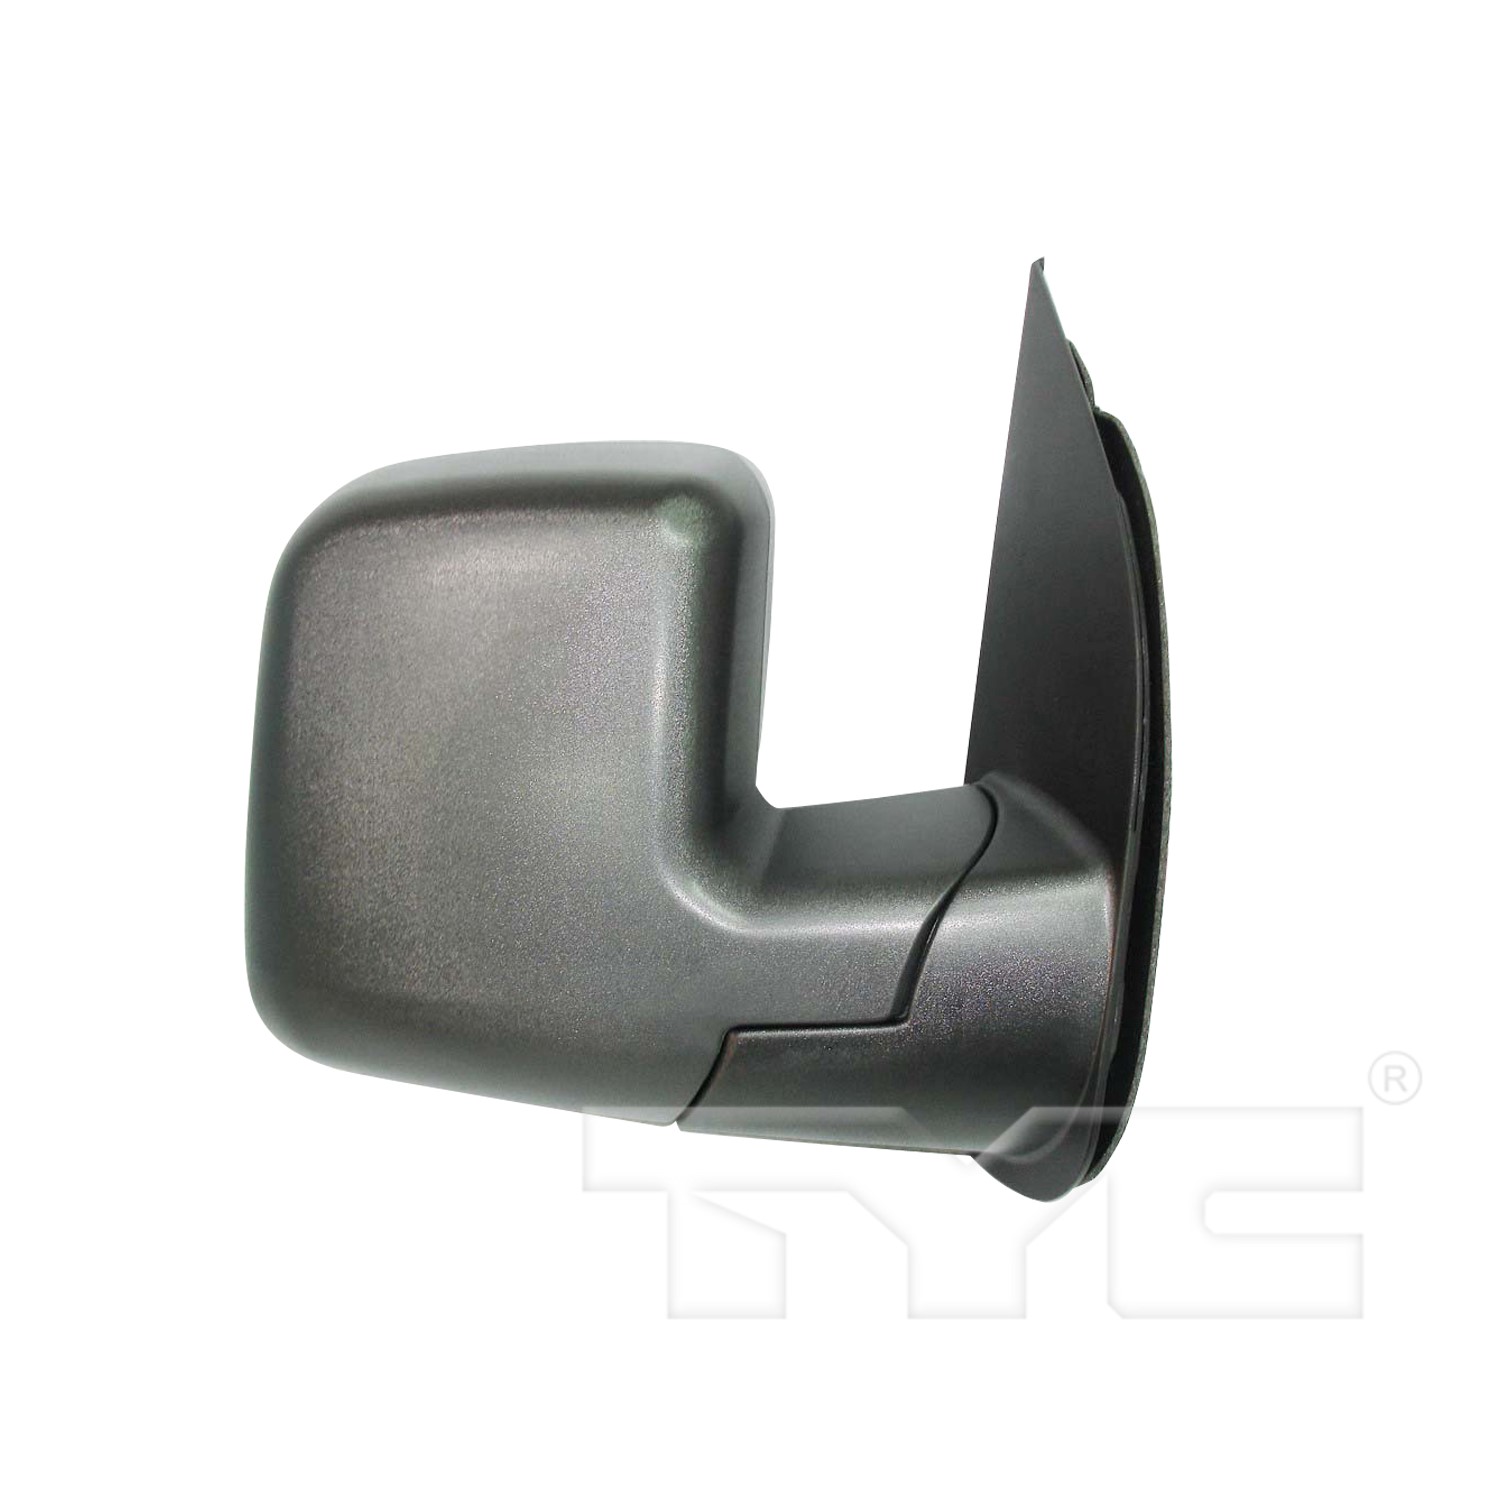 Aftermarket MIRRORS for FORD - E-450 SUPER DUTY, E-450 SUPER DUTY,03-07,RT Mirror outside rear view